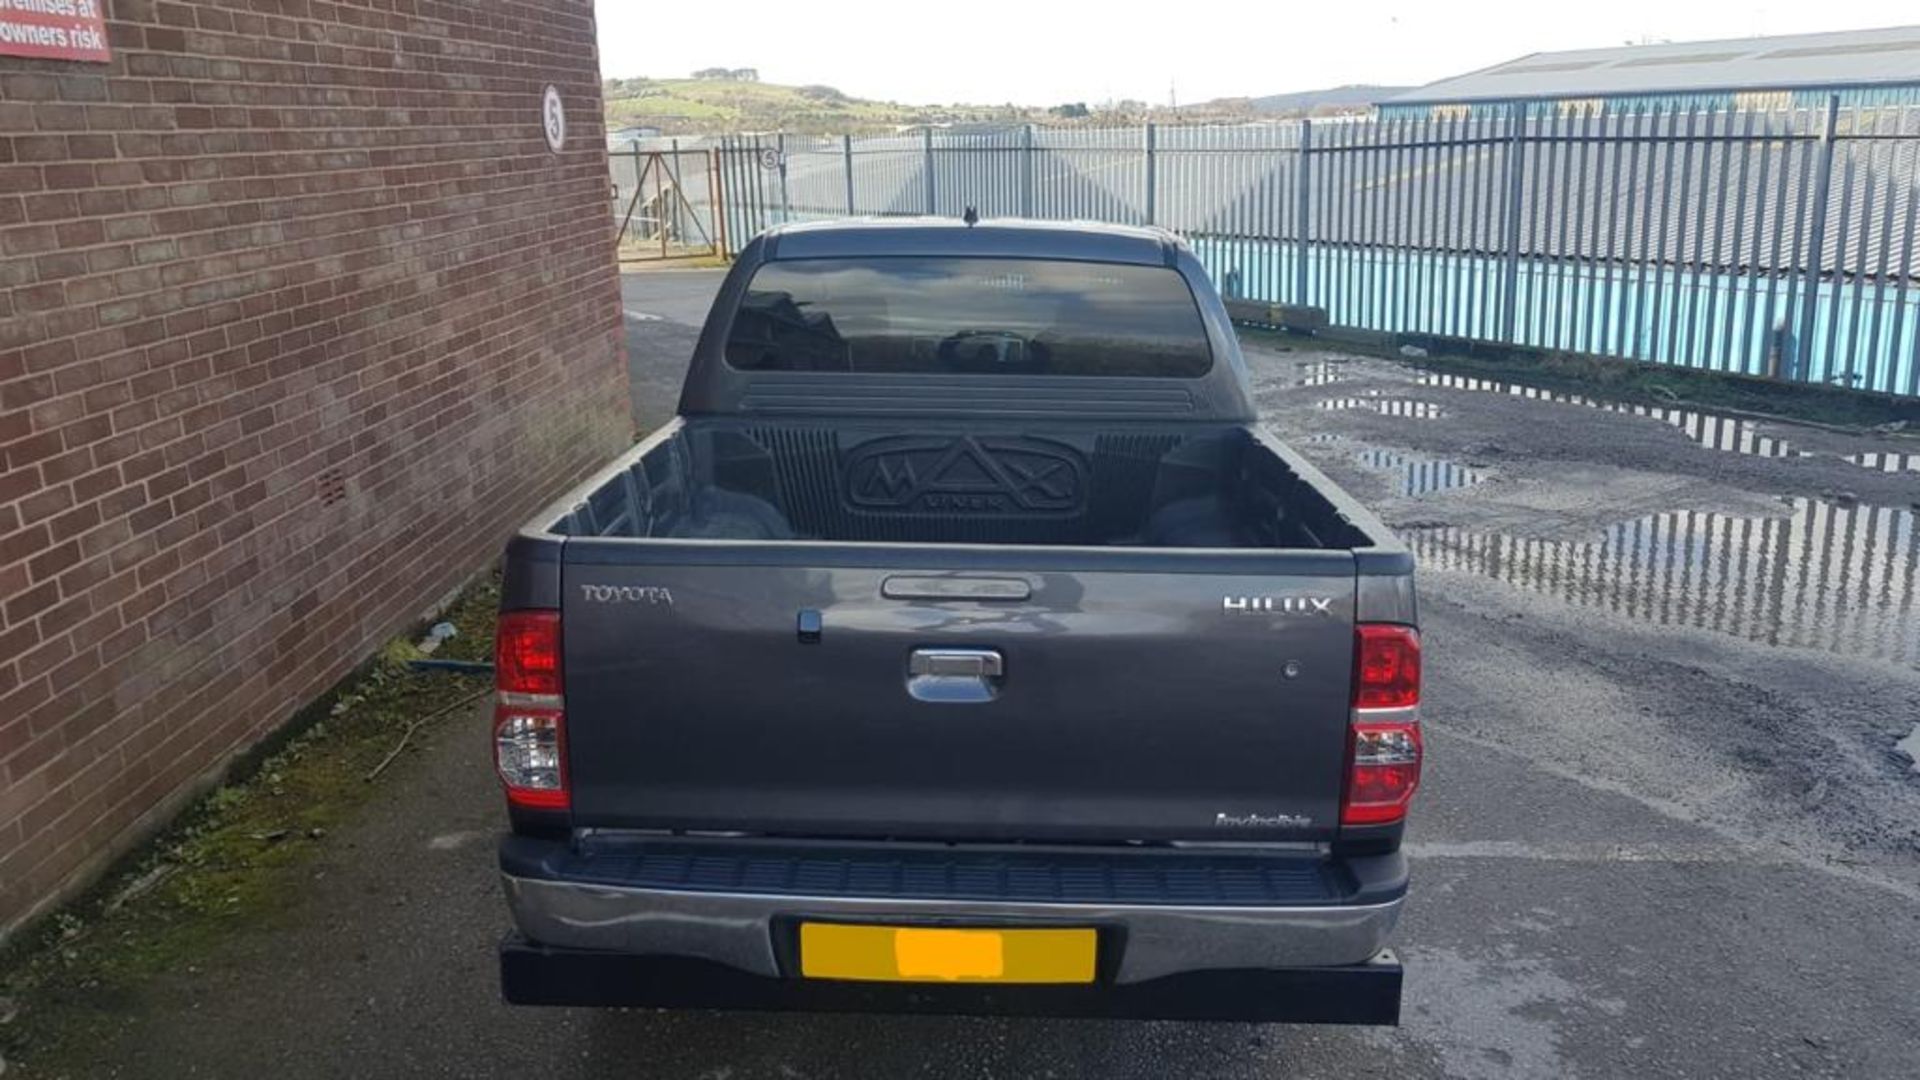 2015/64 REG TOYOTA HILUX INVINCIBLE D-4D 4X4 GREY DIESEL LIGHT UTILITY, SHOWING 1 FORMER KEEPER - Image 7 of 22